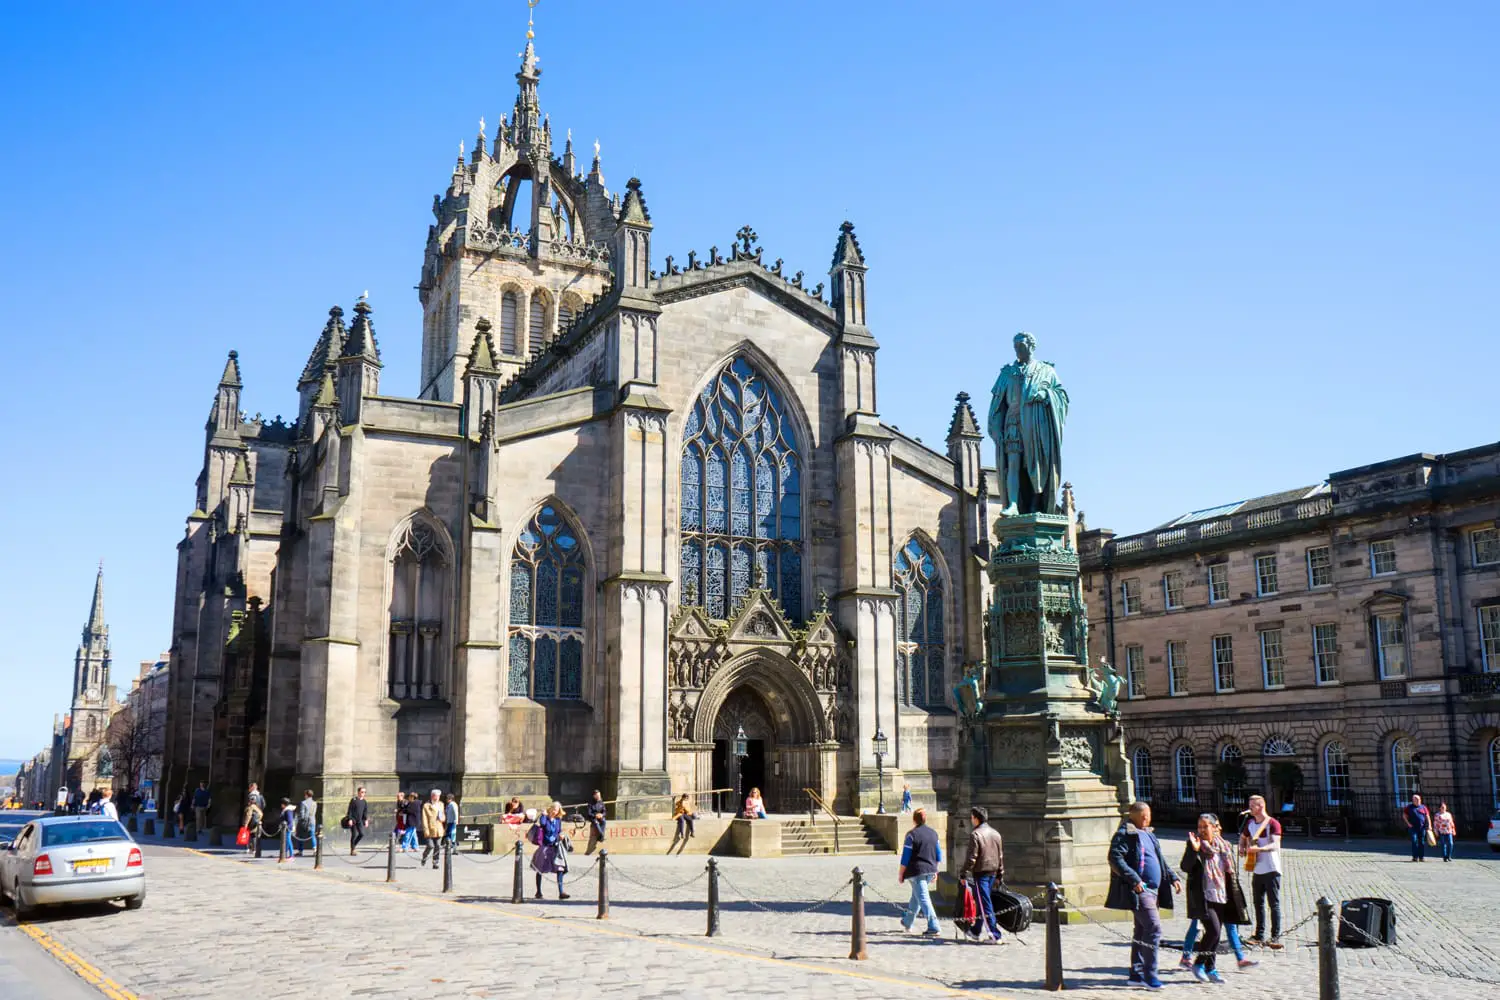 The High Kirk of Edinburgh, also known as the St Giles' Cathedral, is the principal place of worship of the Church of Scotland in Edinburgh.